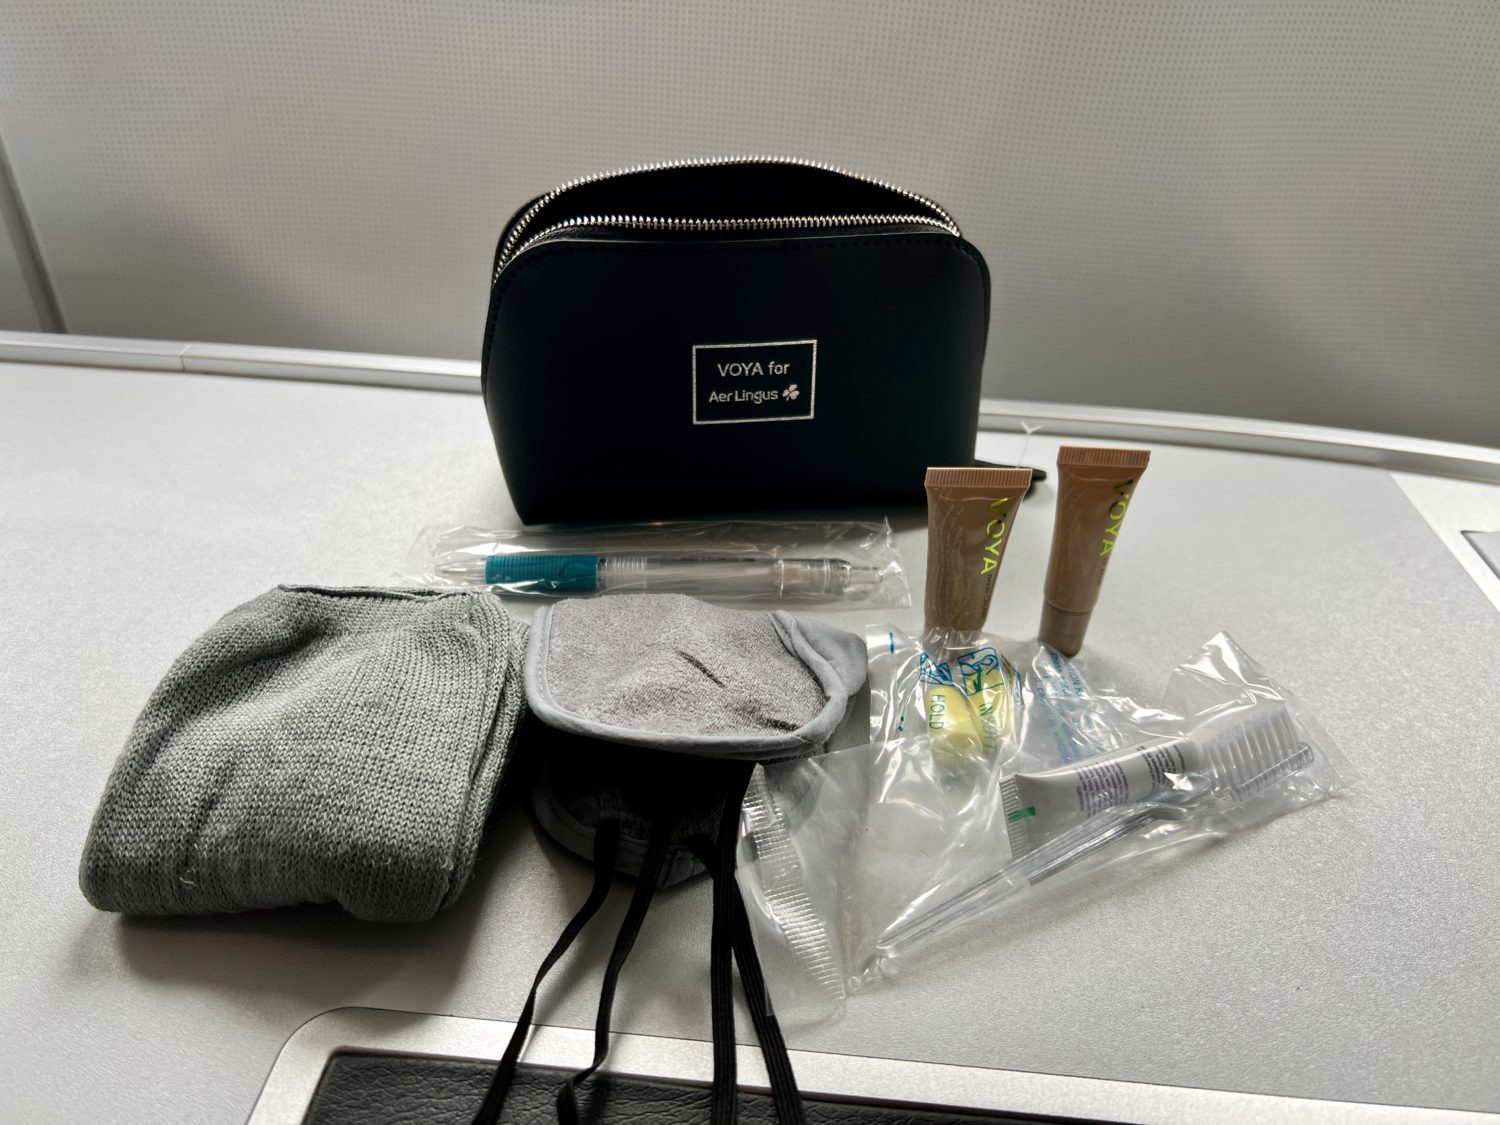 aer lingus business class amenity kit contents  Aer Lingus Business Class Review, A321 Dublin to Washington, DC &#8211; Thrifty Traveler aer lingus business class amenity kit contents scaled